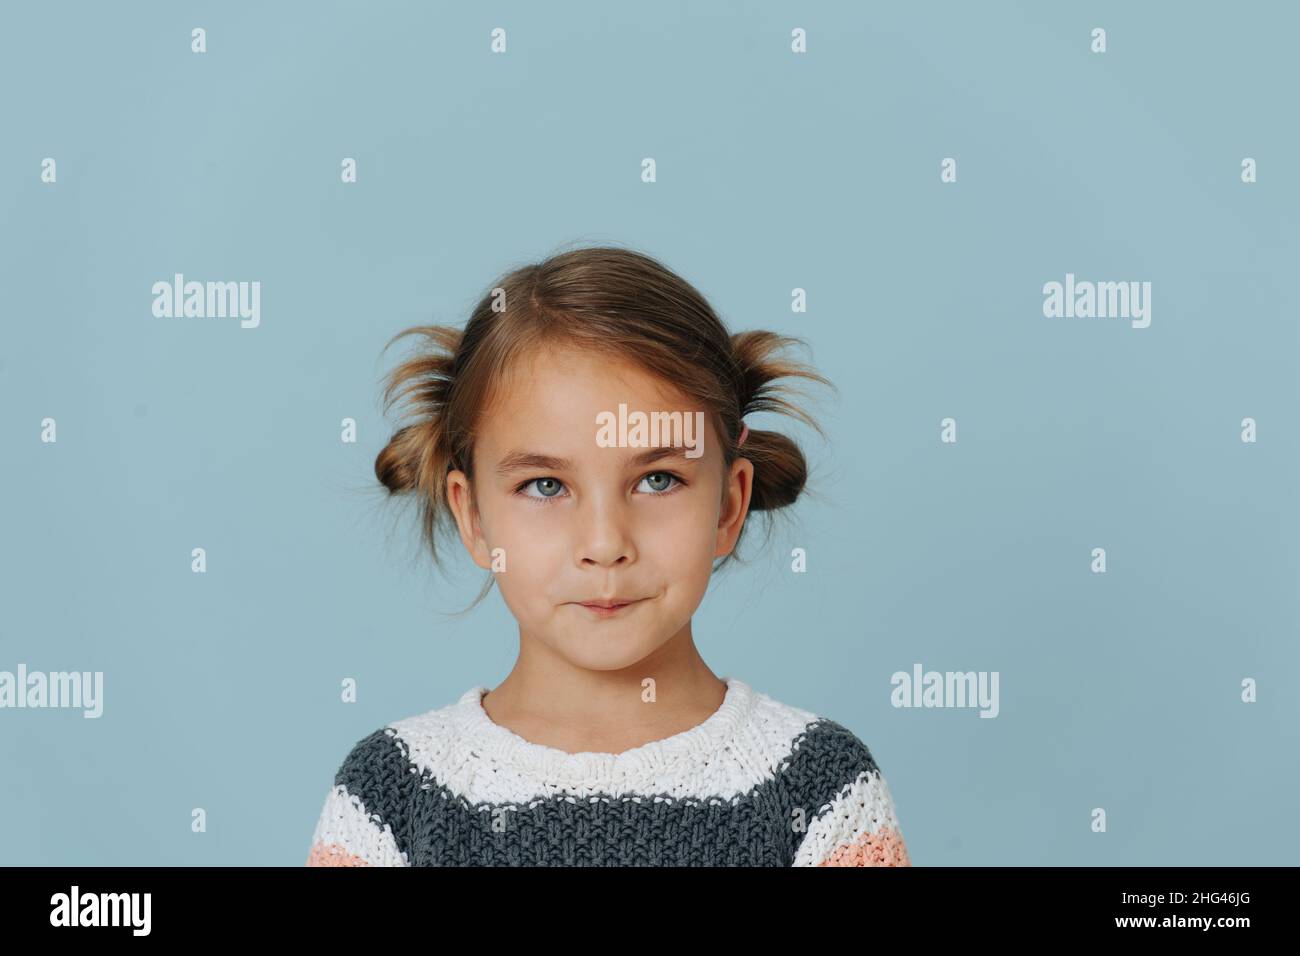 Tight-lipped little girl in striped sweater, hair in buns over blue background. Looking at someone. Stock Photo